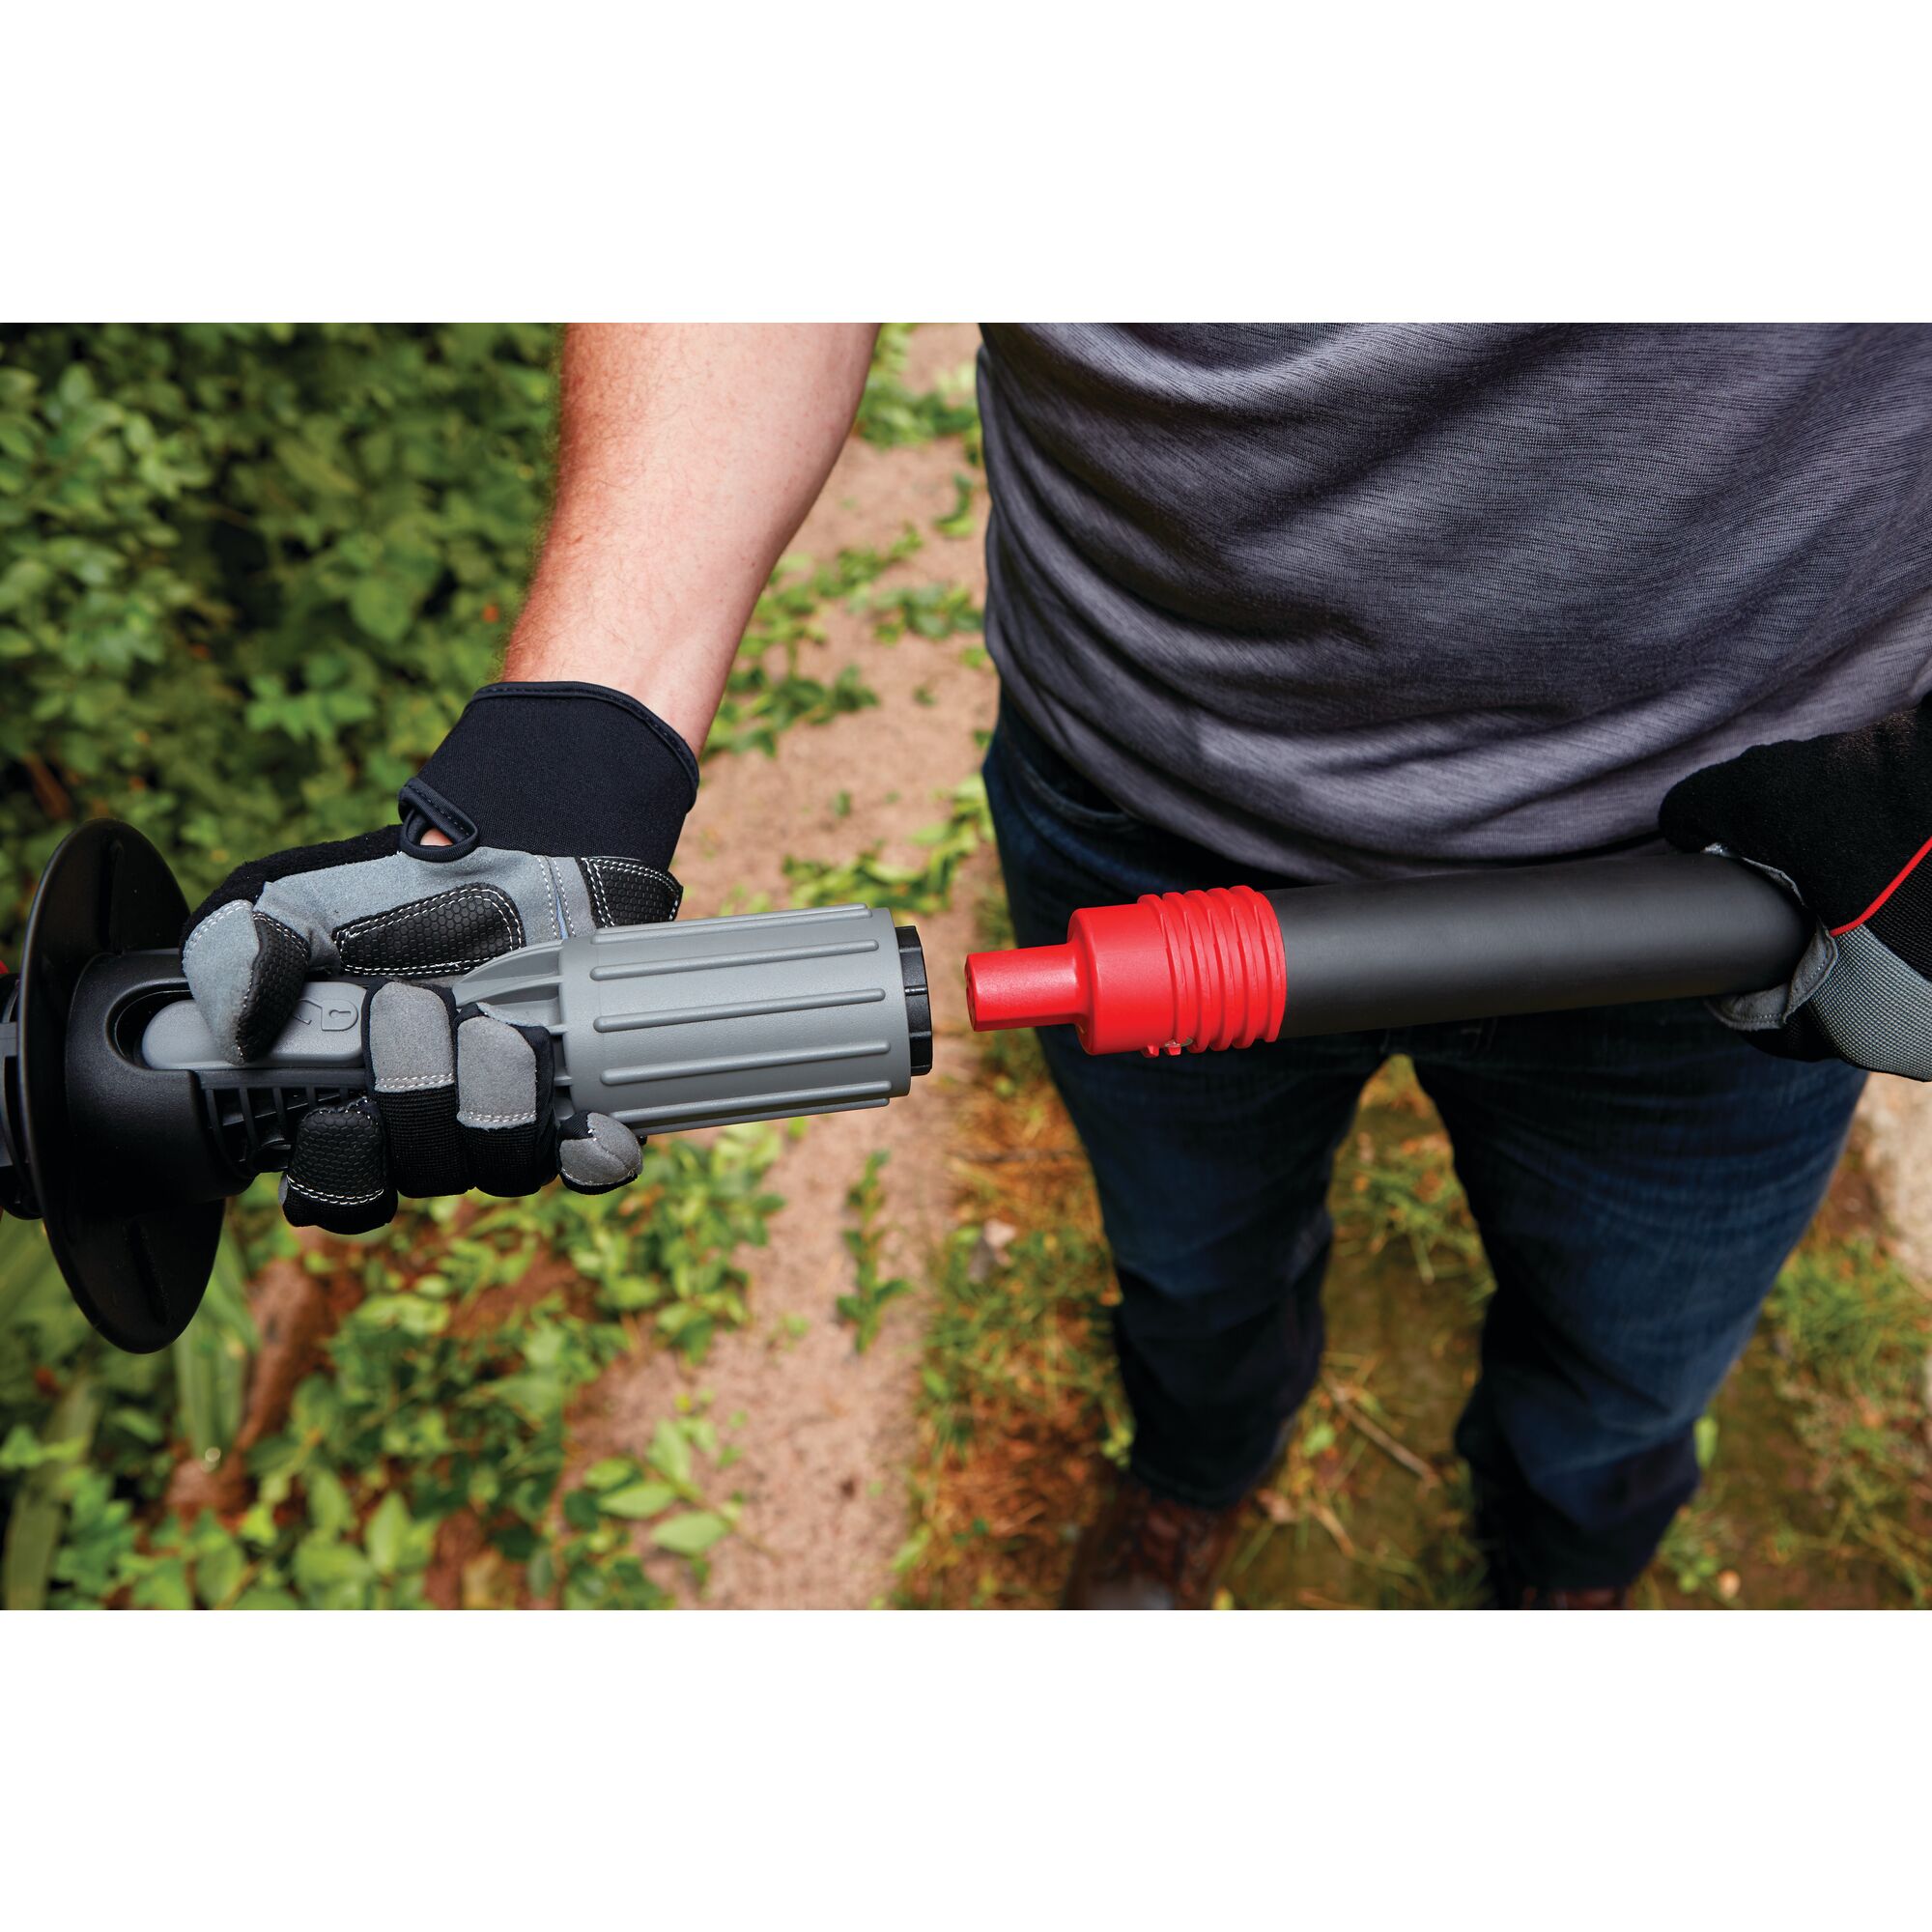 Padded grip and 180 degree pivoting head feature of 20 volt 18 inch cordless pole hedge trimmer kit.